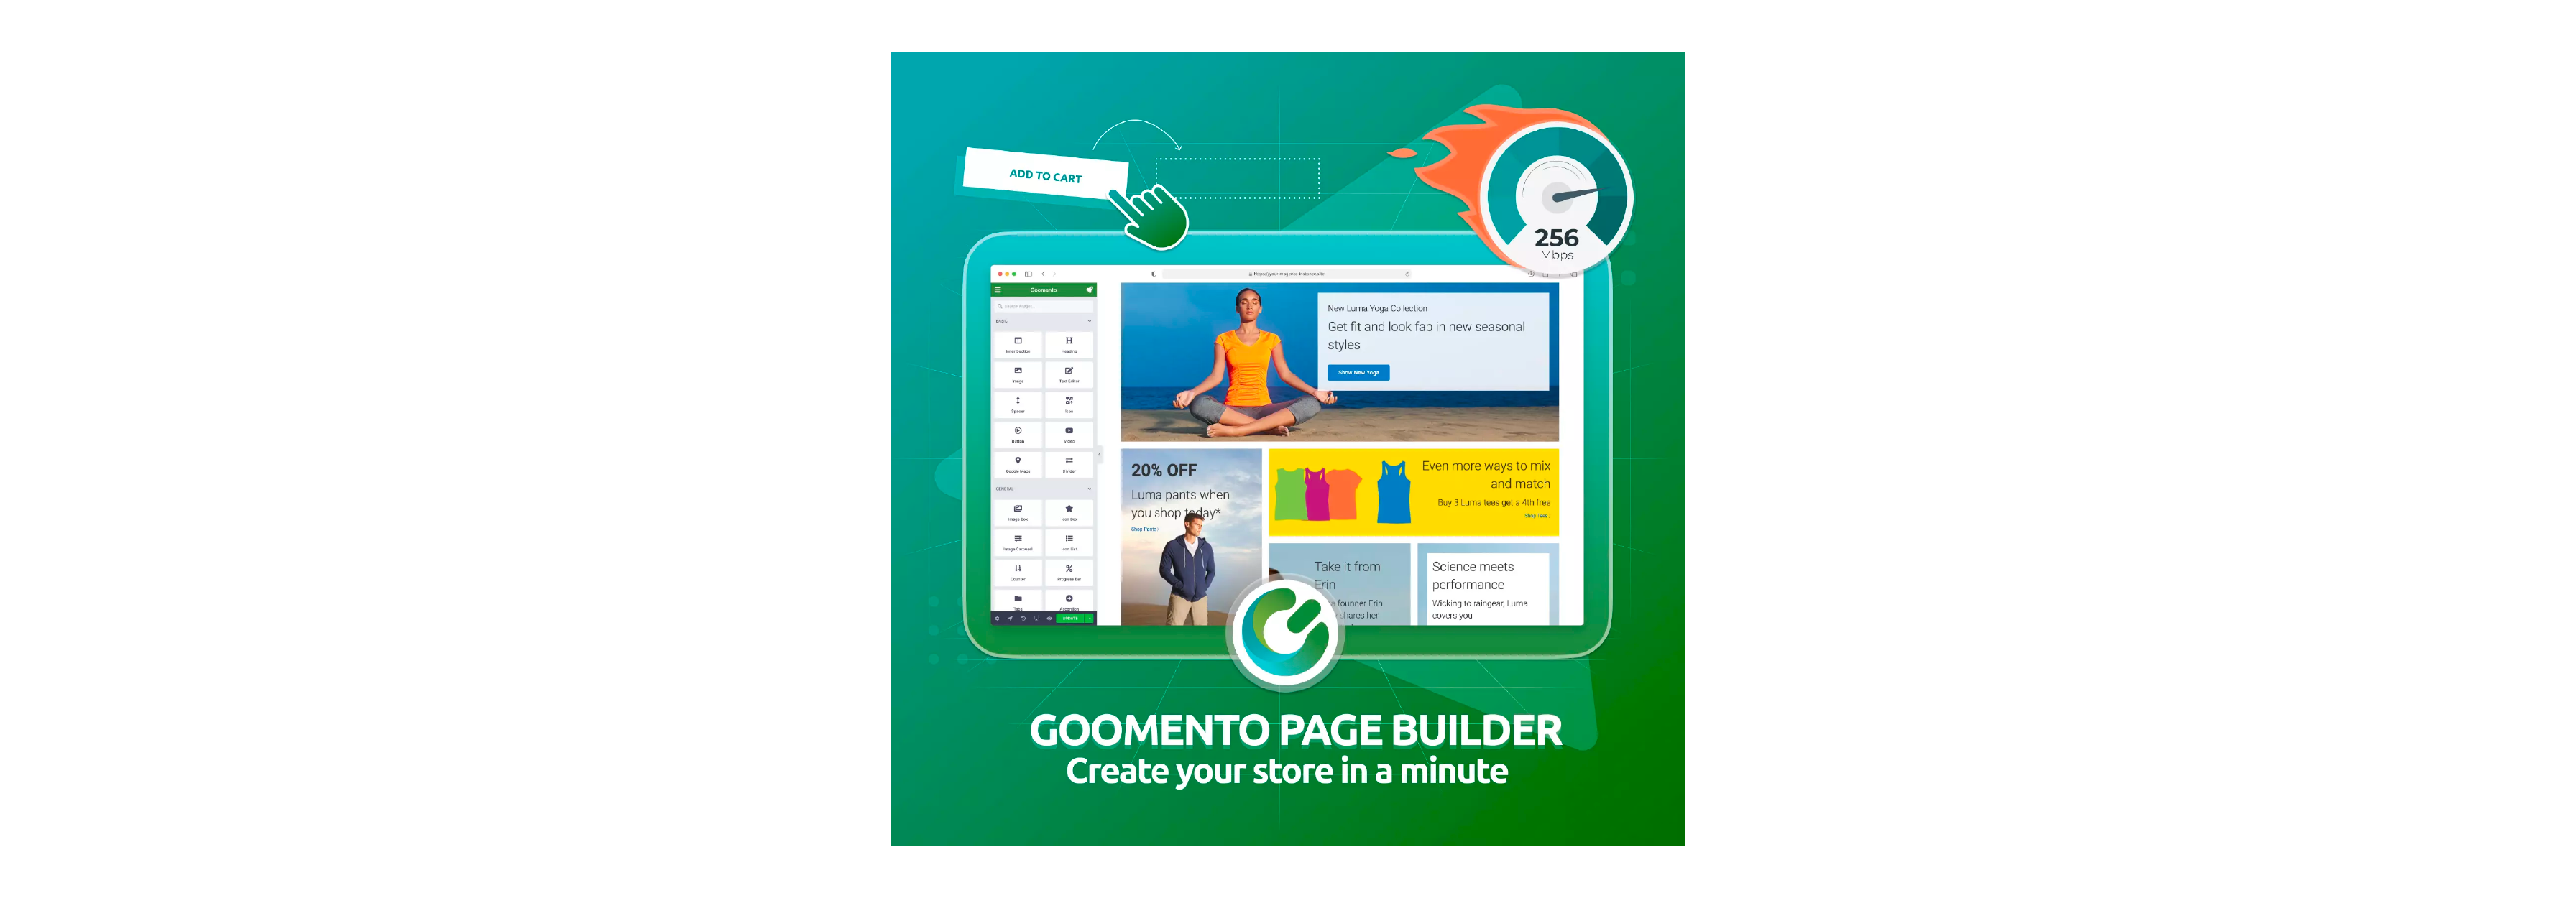 Goomento Page Builder Extension for Magento Stores